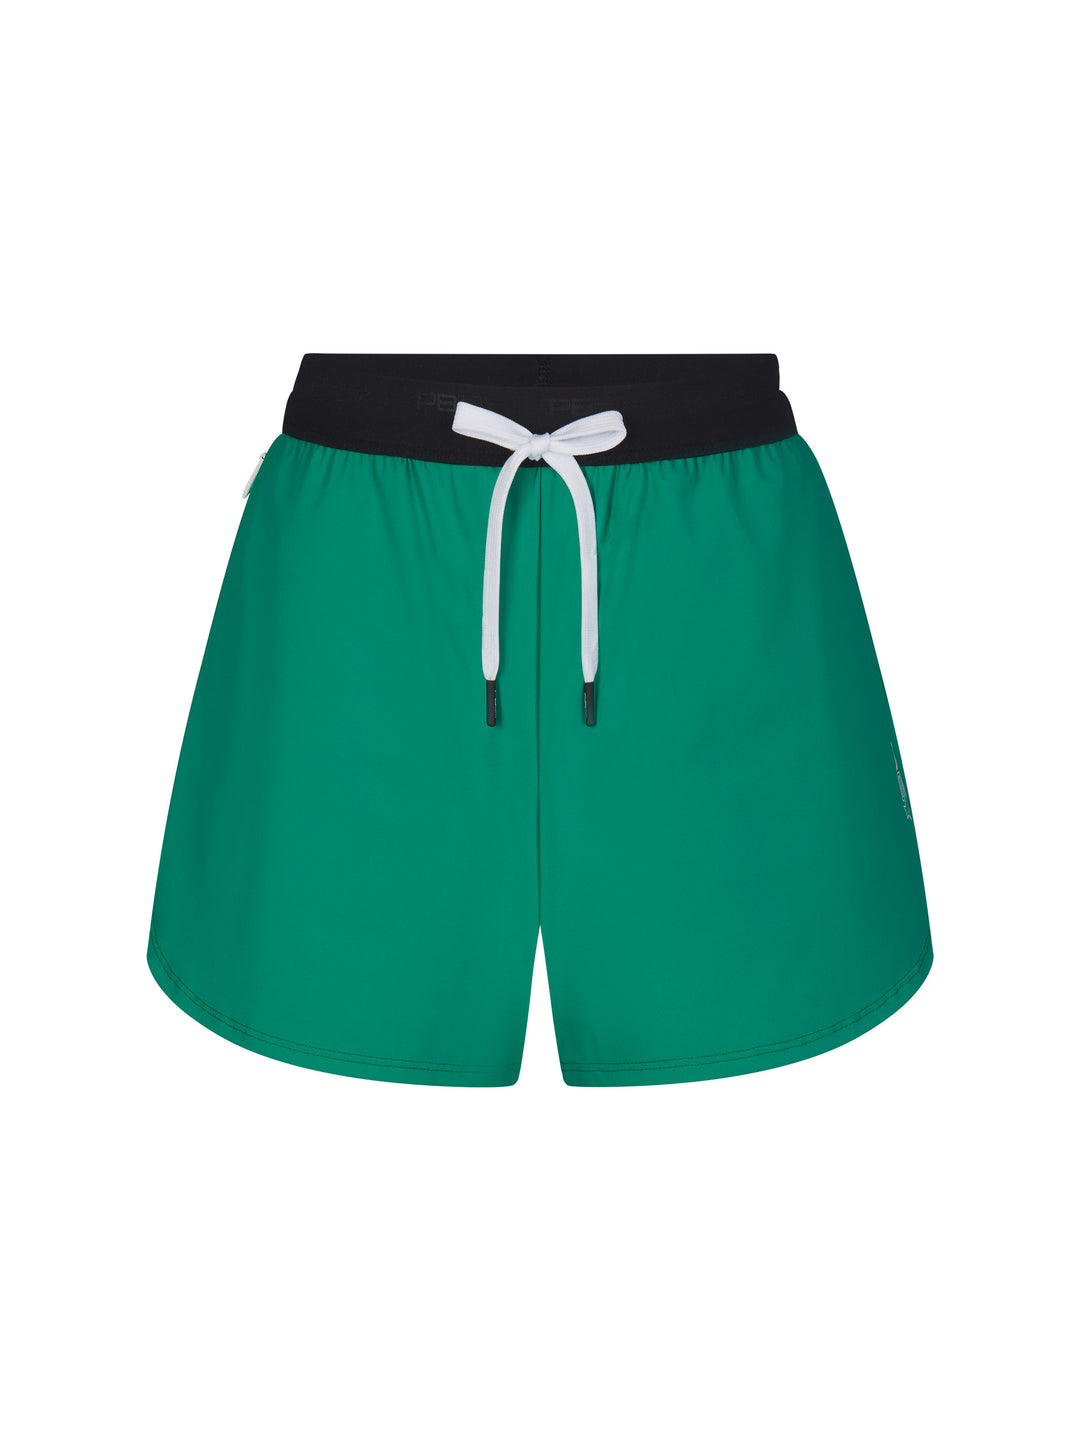 Women's Signature Court Short in jade with black waistband with white drawstring.